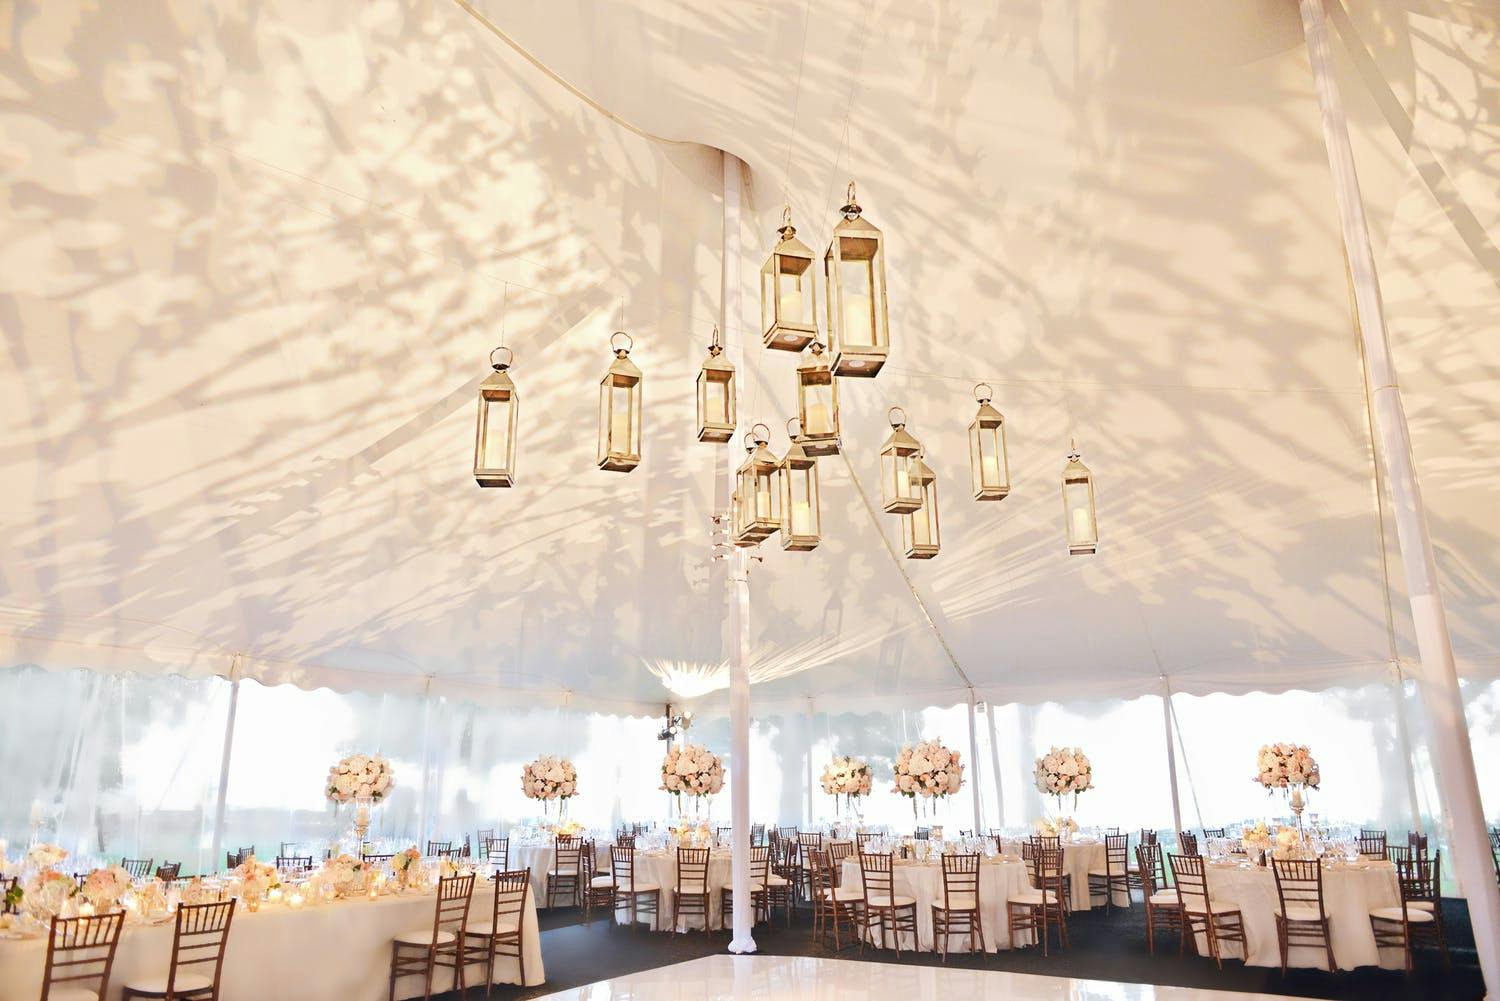 White Pole Tent With Lantern Wedding Ceiling Decorations and Dappled Treetop Lighting Projection | PartySlate